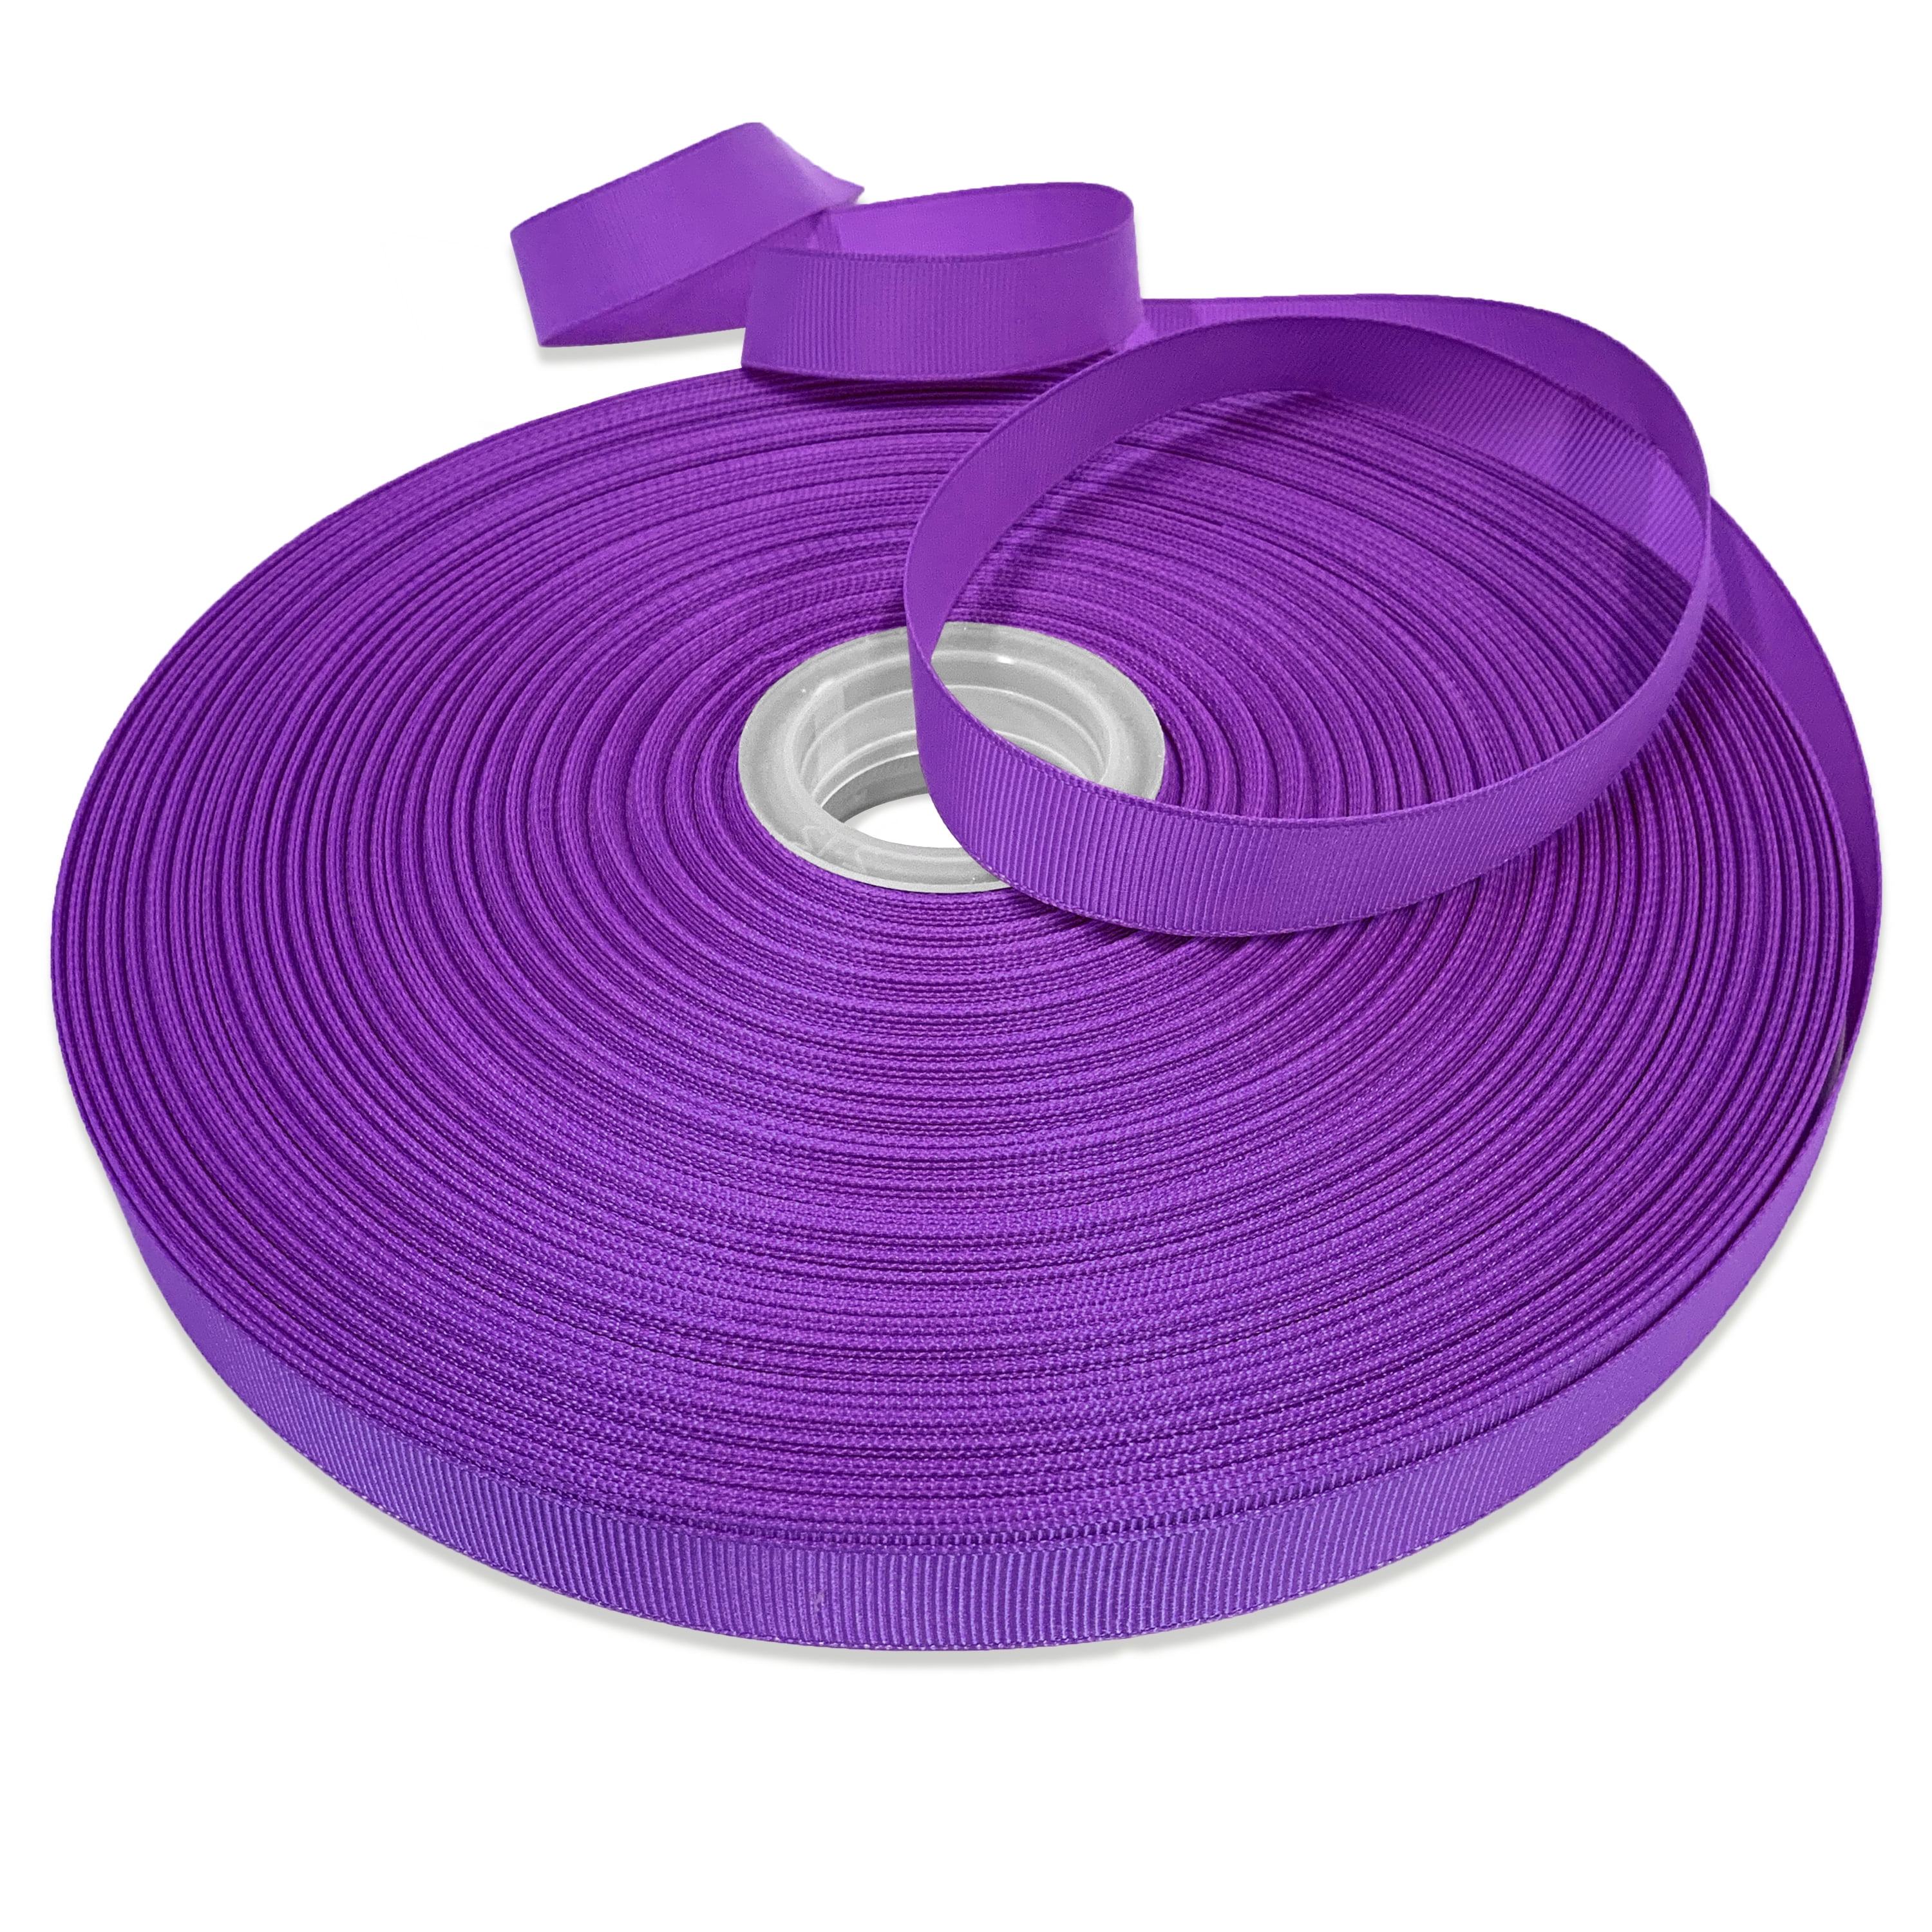 Solid Grosgrain Ribbon, 3/8-Inch, 50 Yards, Lavender – Party Spin